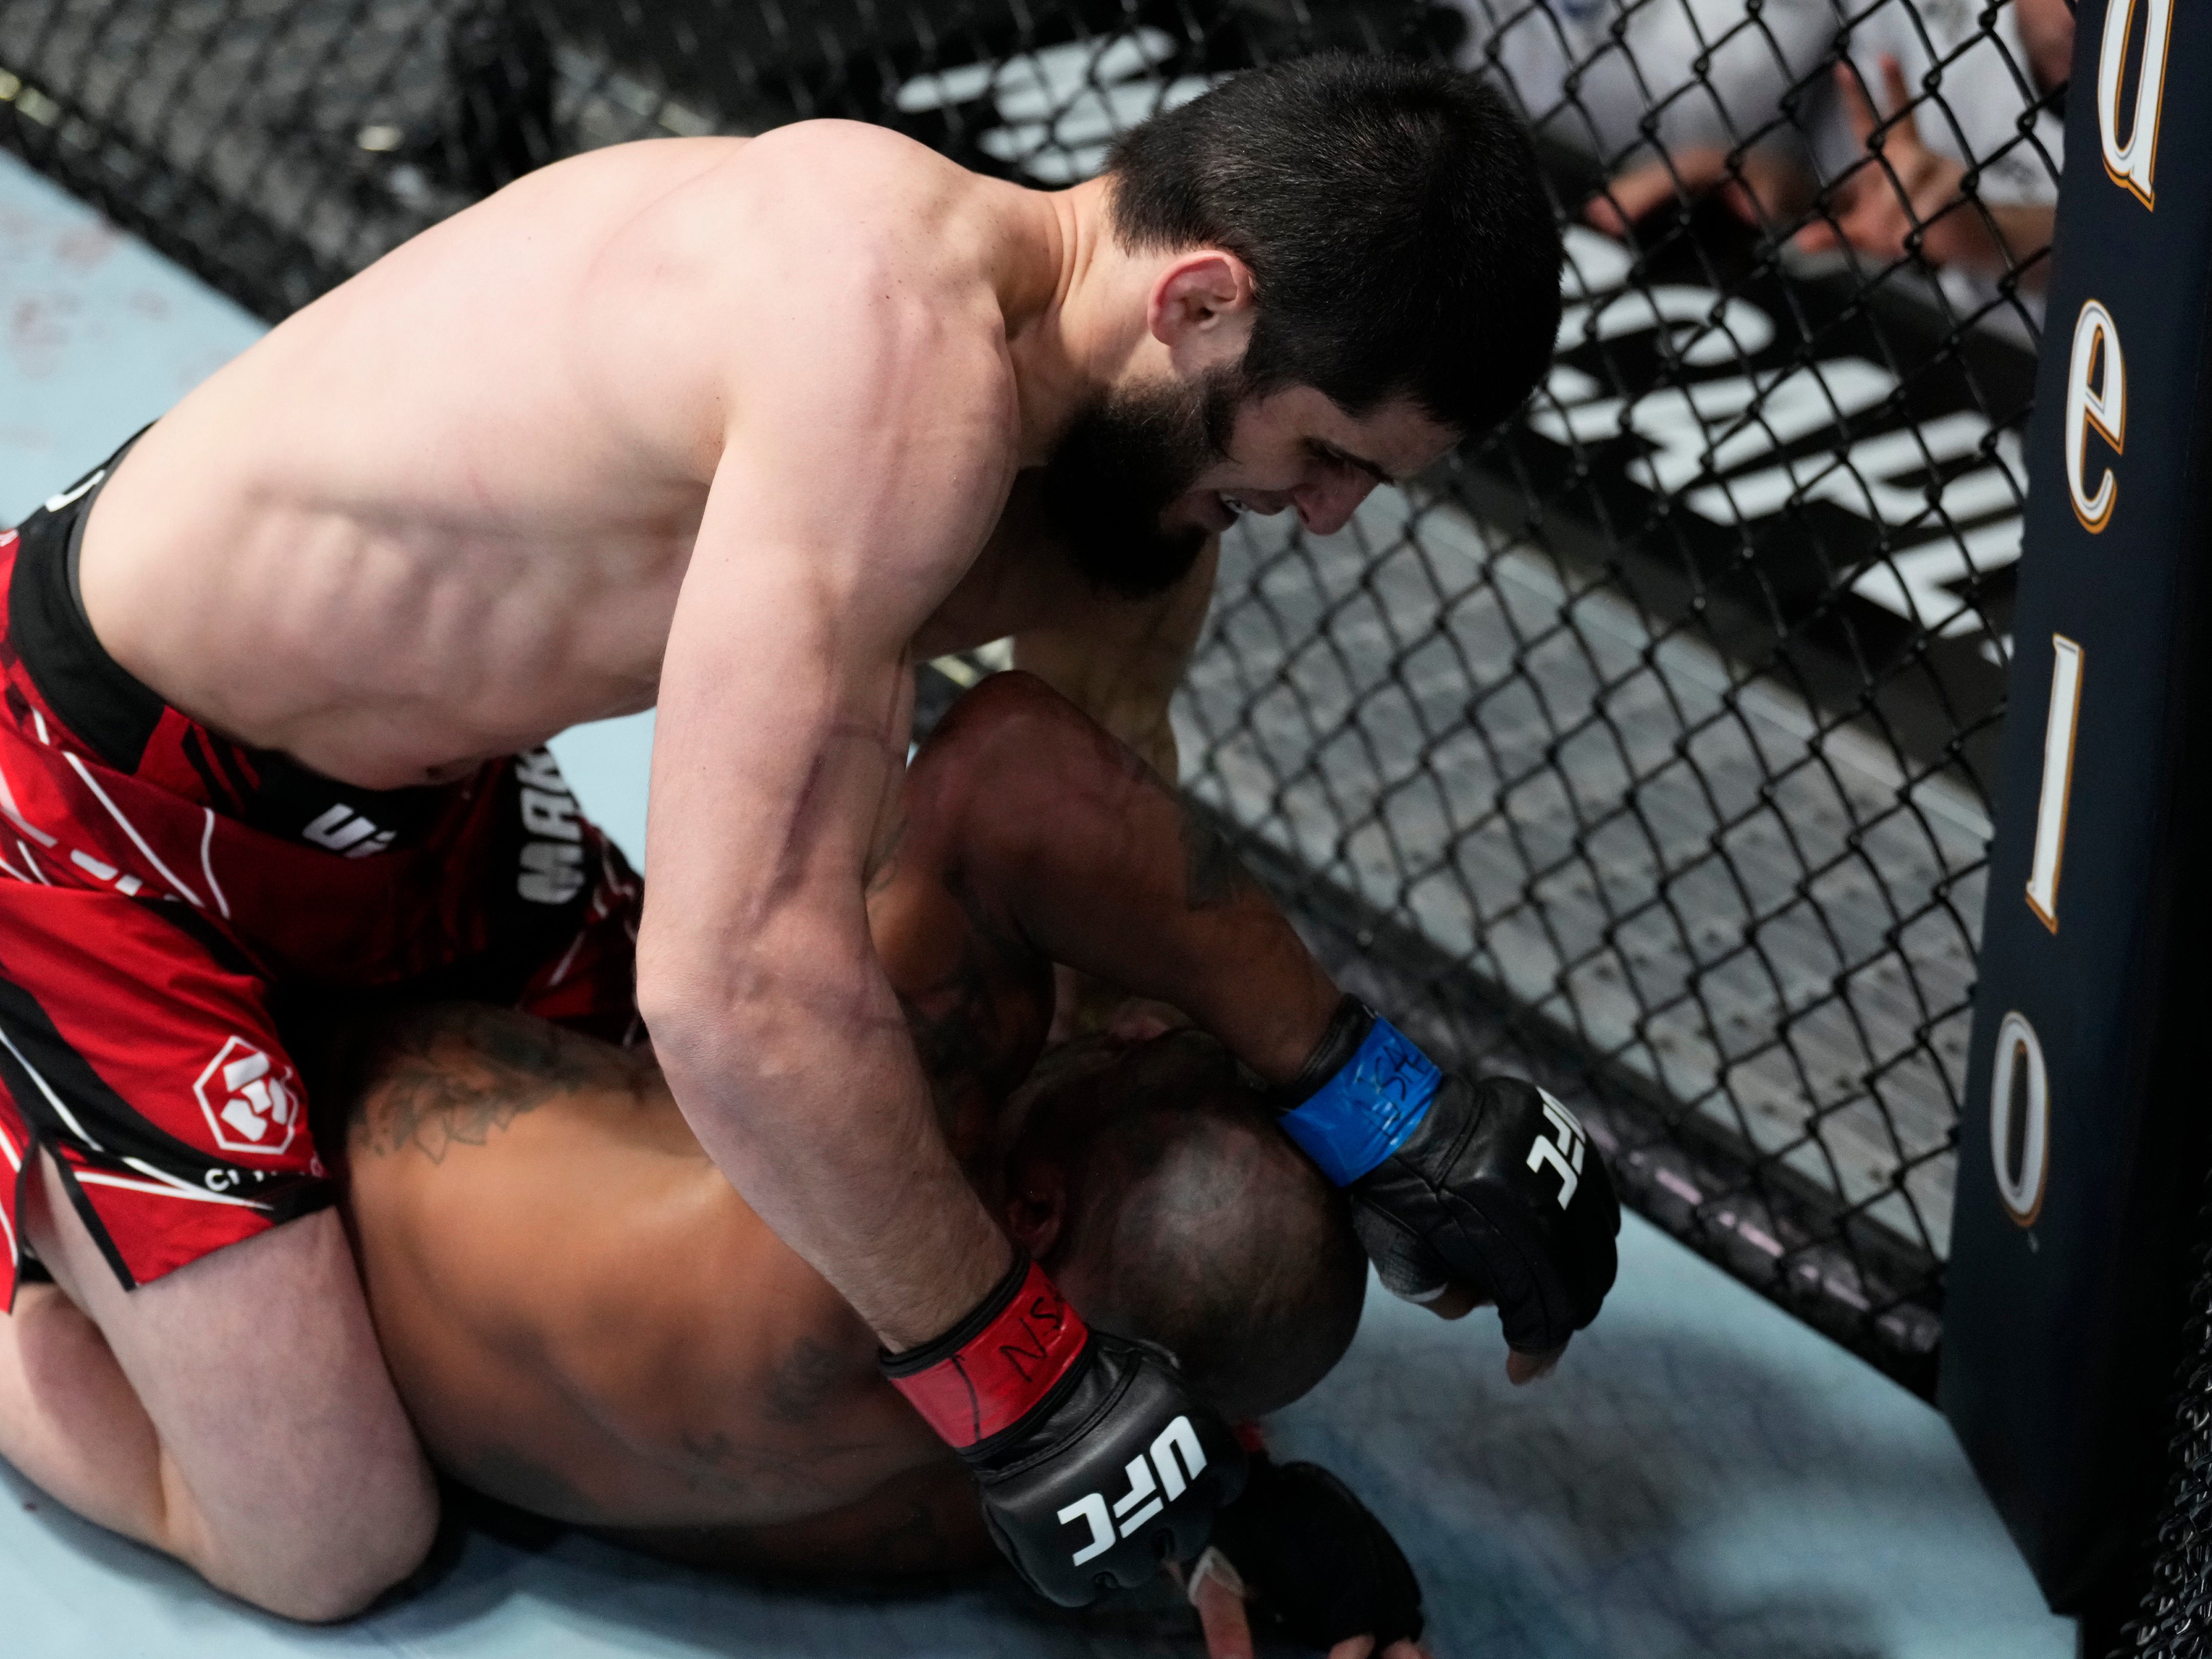 Islam Makhachev is seen by many fans as lightweight champion in waiting